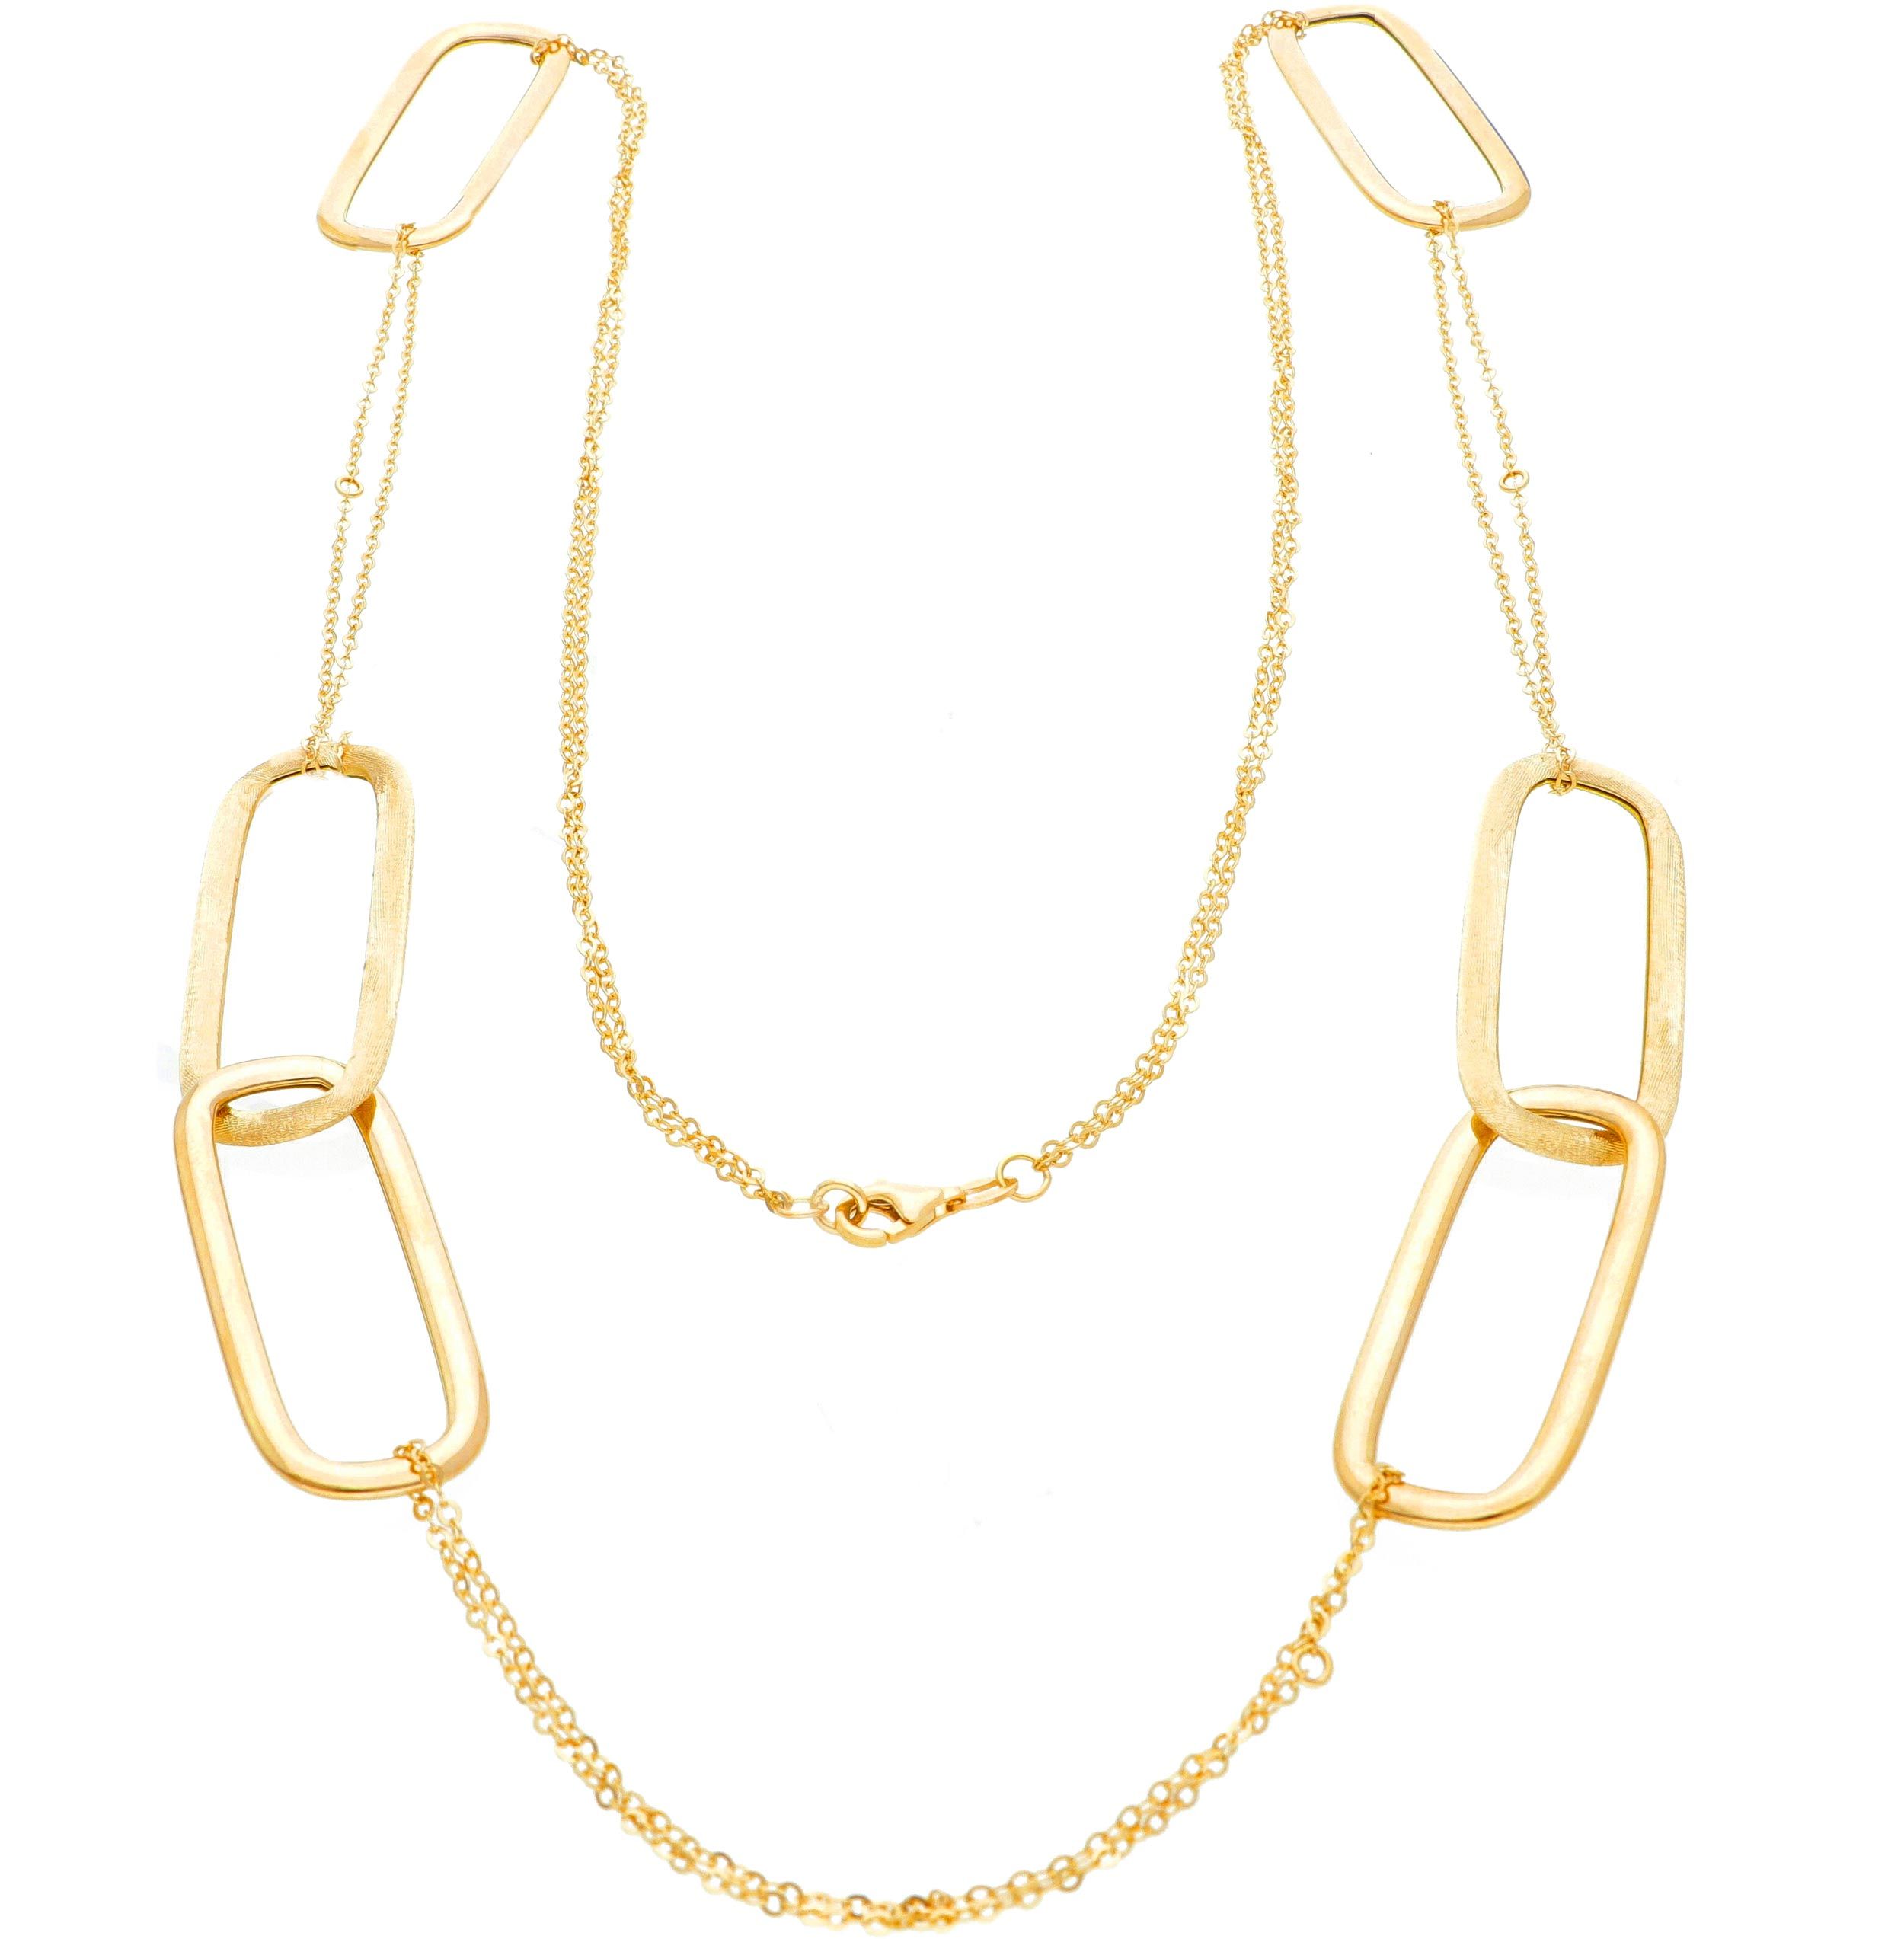 Golden necklace k14 with parallelogram rings (code S245948)